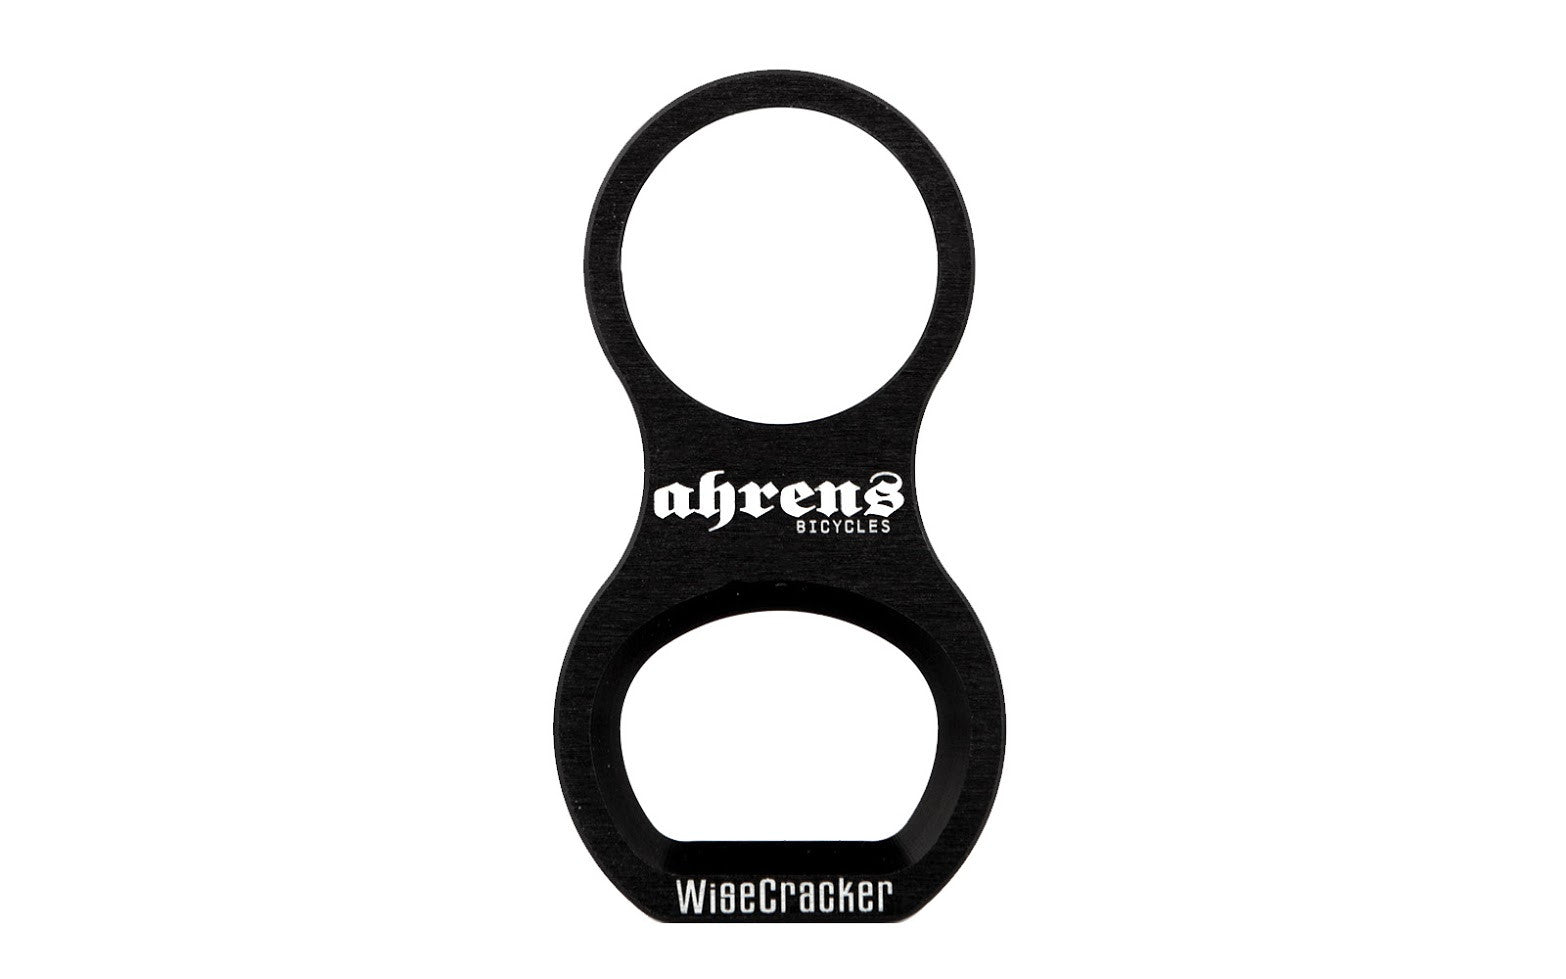 WiseCracker LITE with Ahrens Bicycles logo